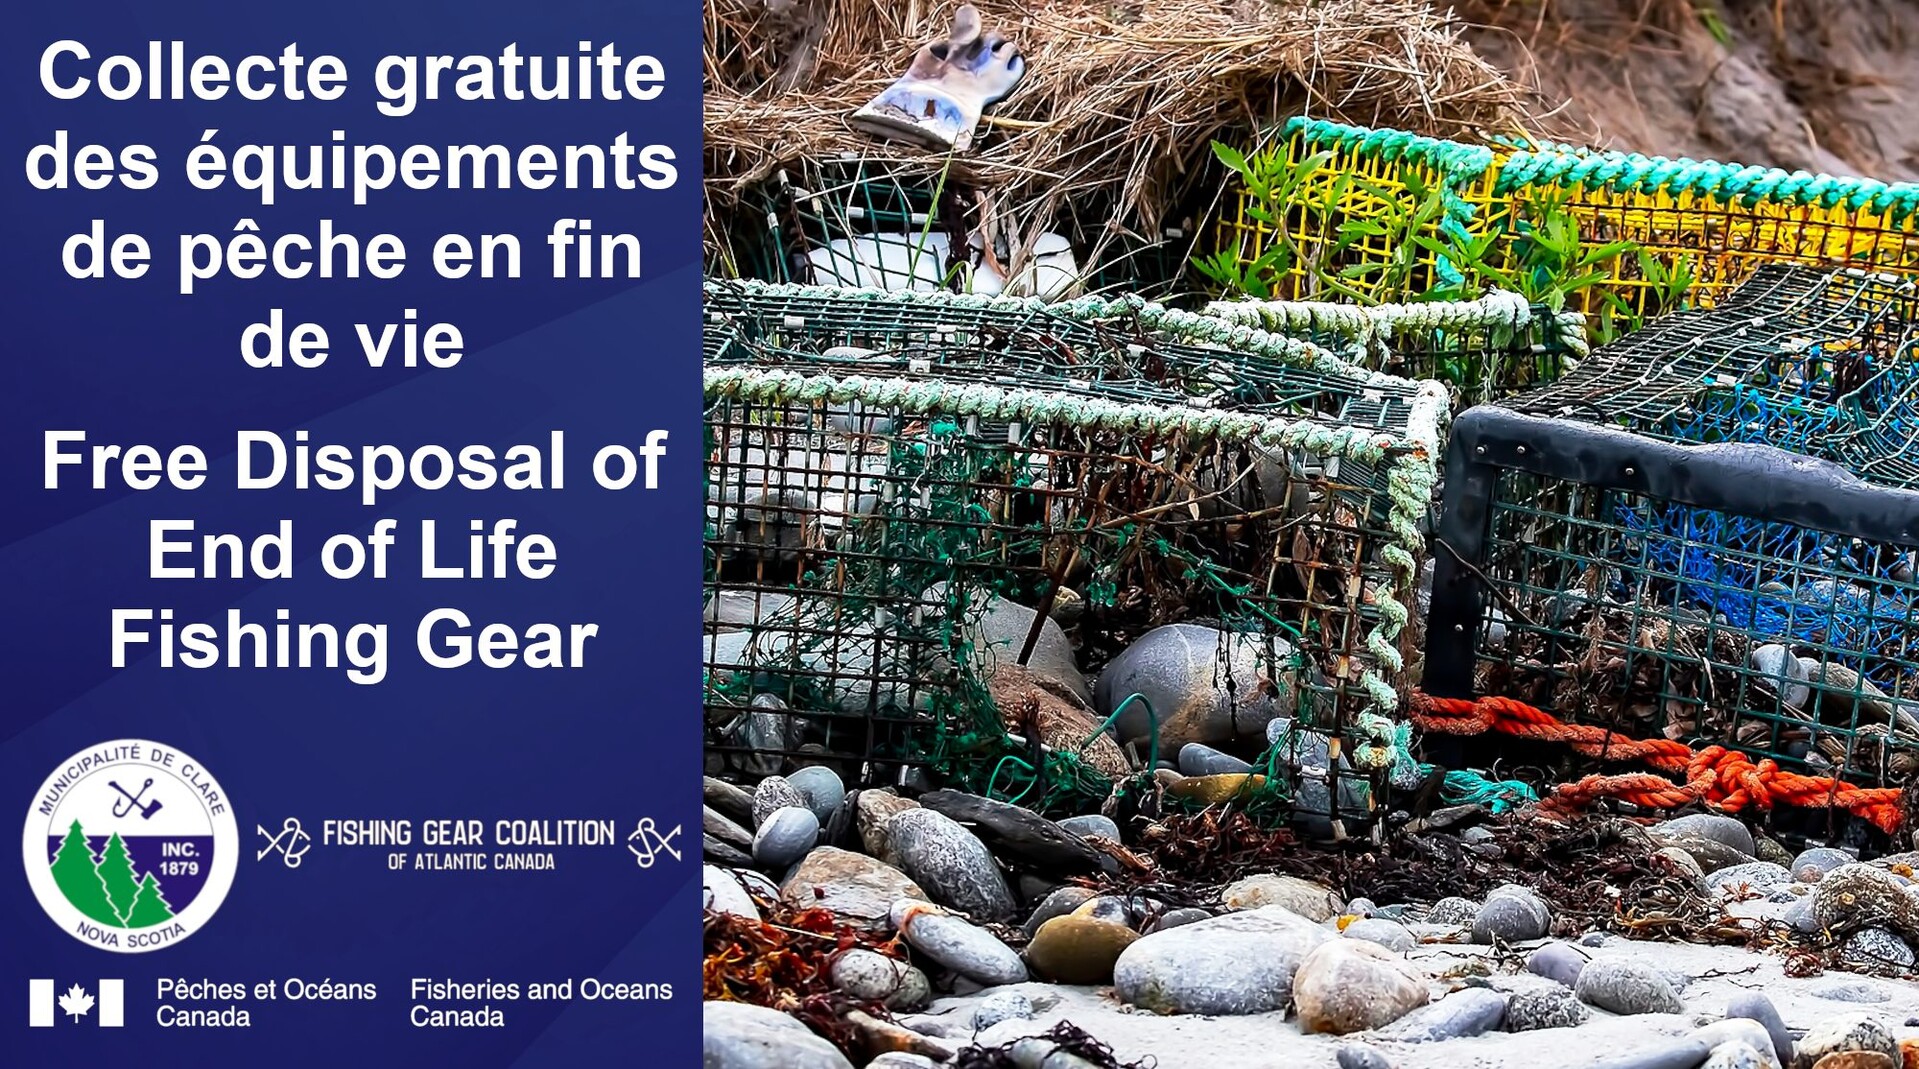 Free Disposal of End of Life Fishing Gear